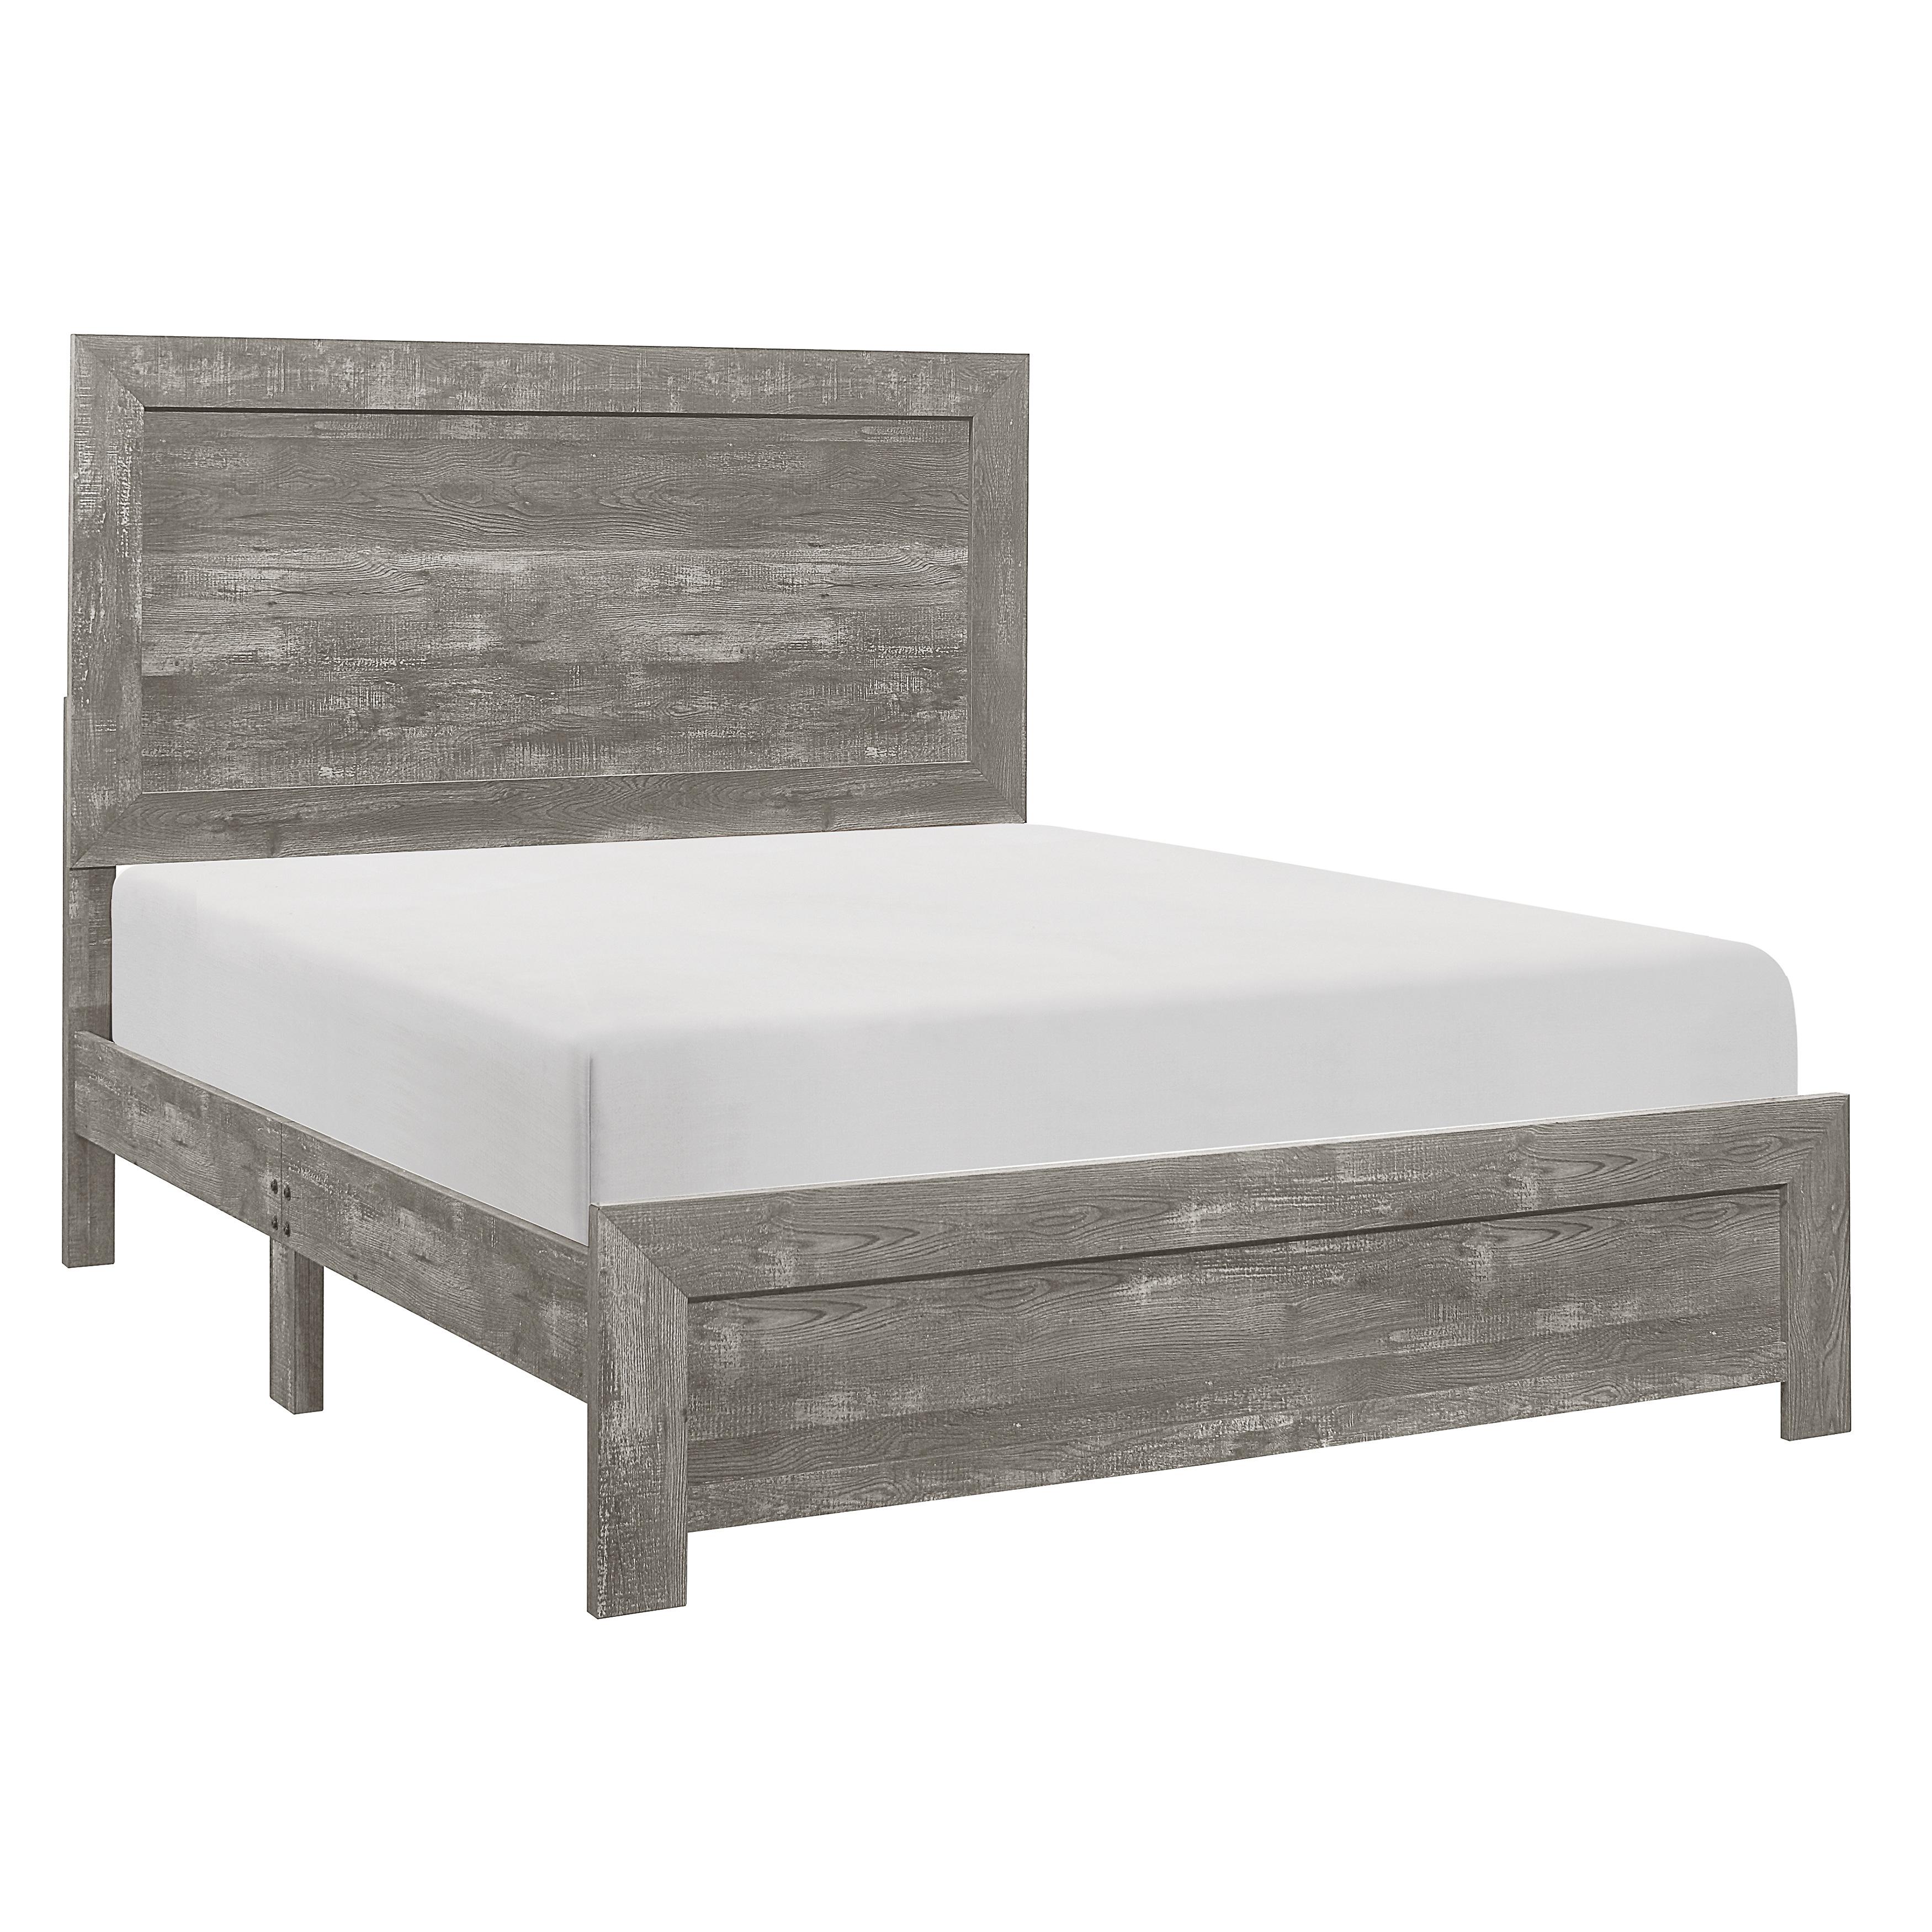 Rustic Bed 1534GY-1 Corbin 1534GY-1 in Gray 